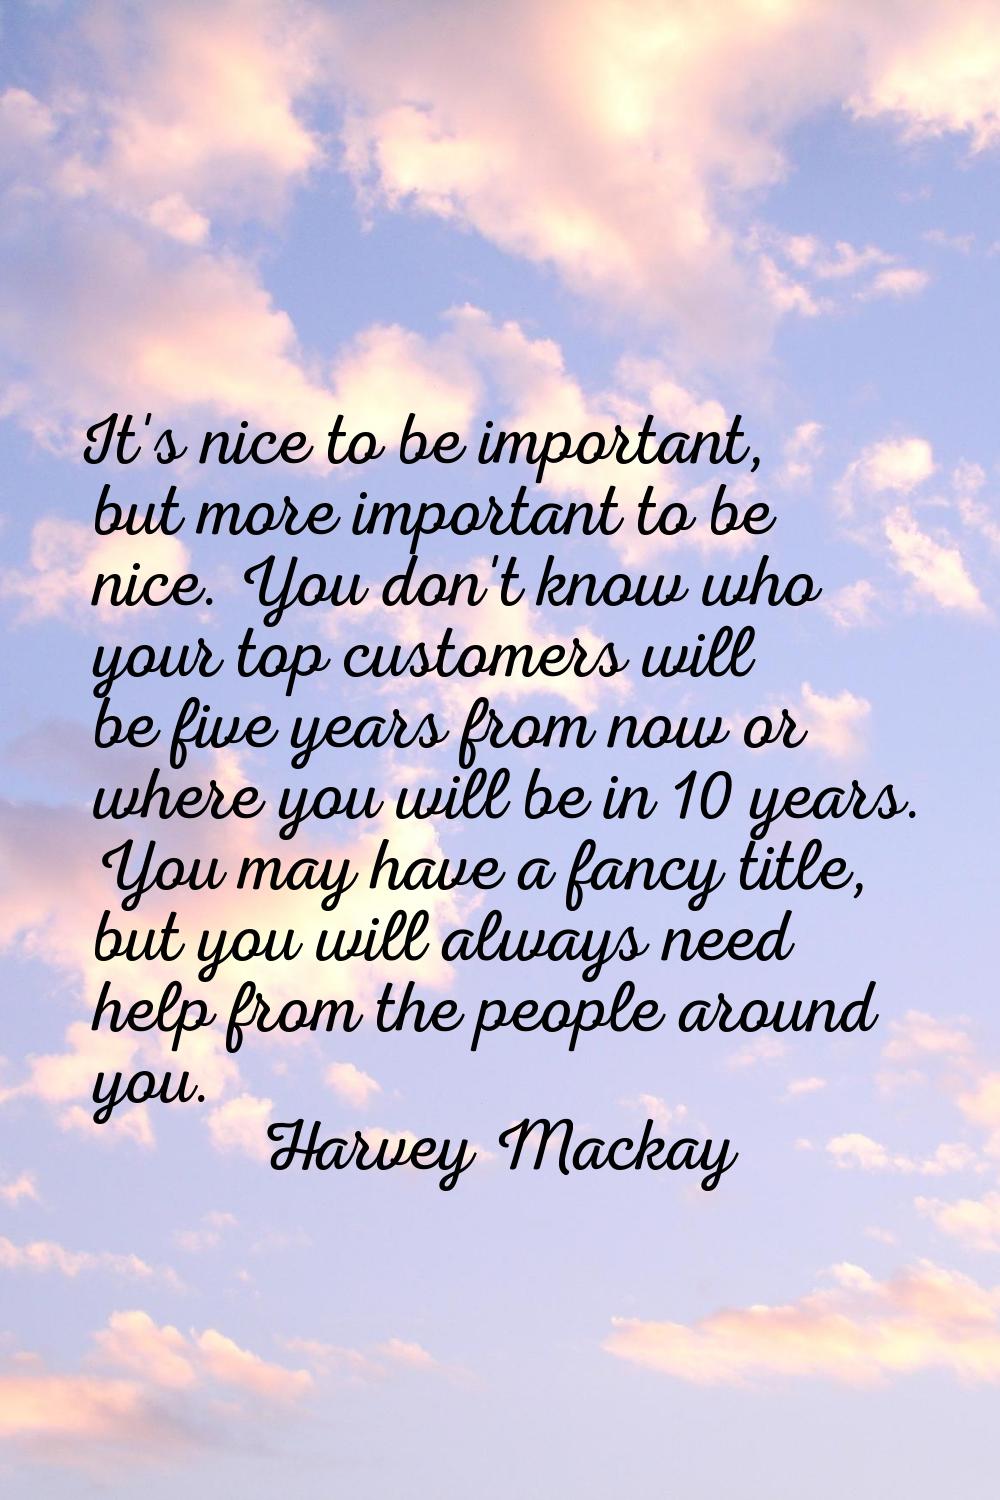 It's nice to be important, but more important to be nice. You don't know who your top customers wil